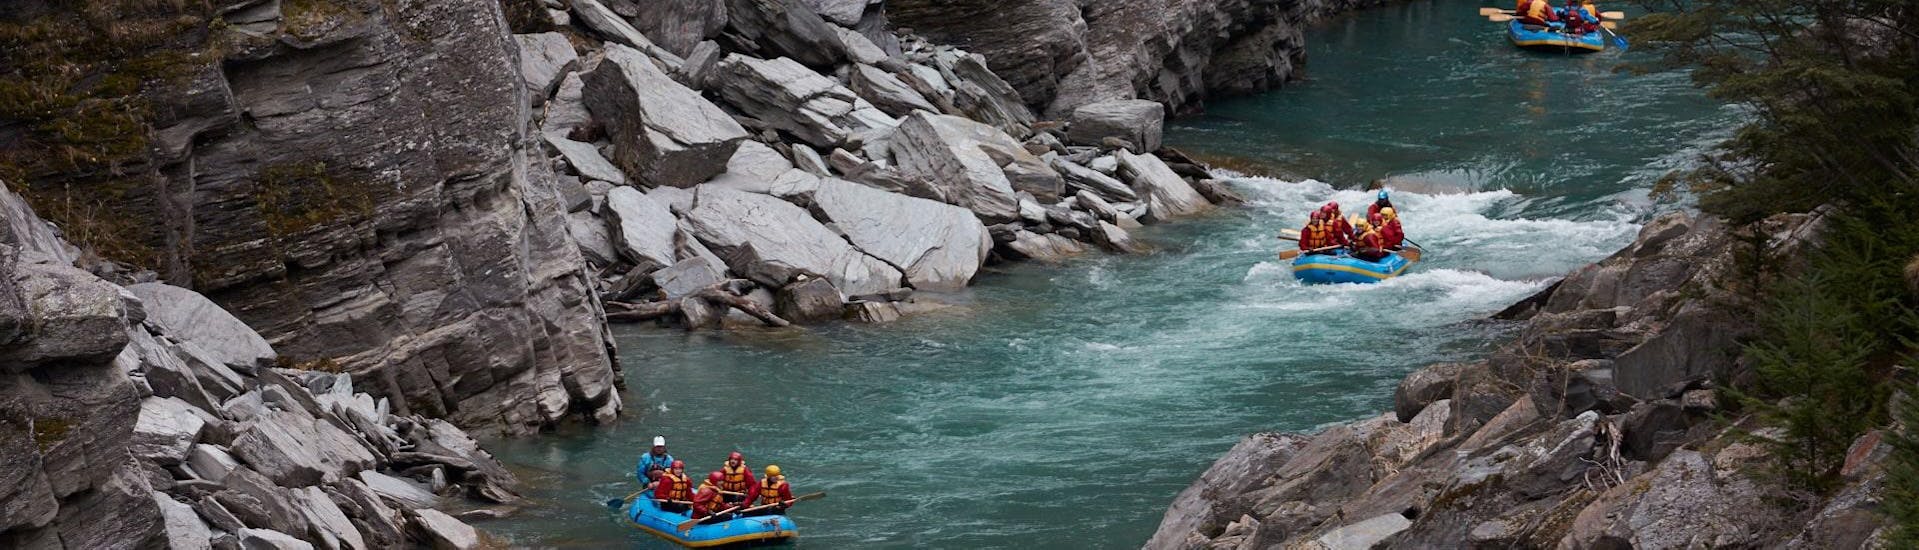 Participants of the White Water Rafting from Queenstown on Shotover River are observing rafts passing by with the local guides from Go Orange